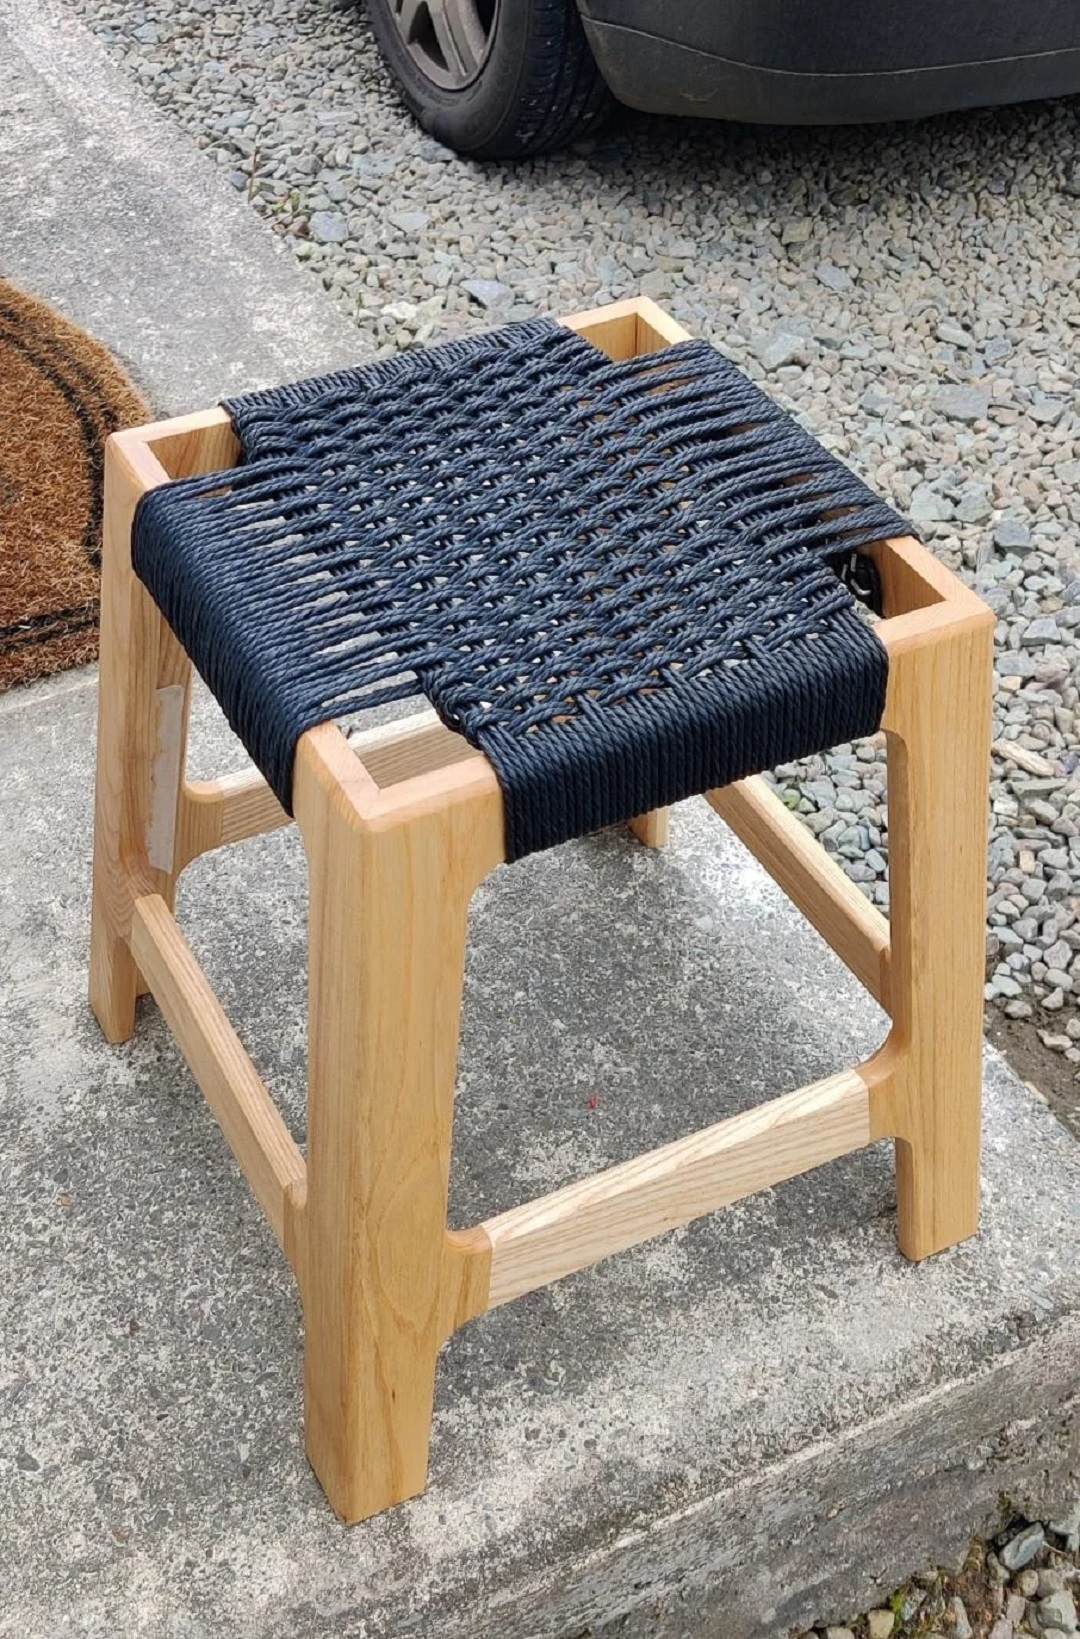 Danish Cord Stool (First Time Weaving)